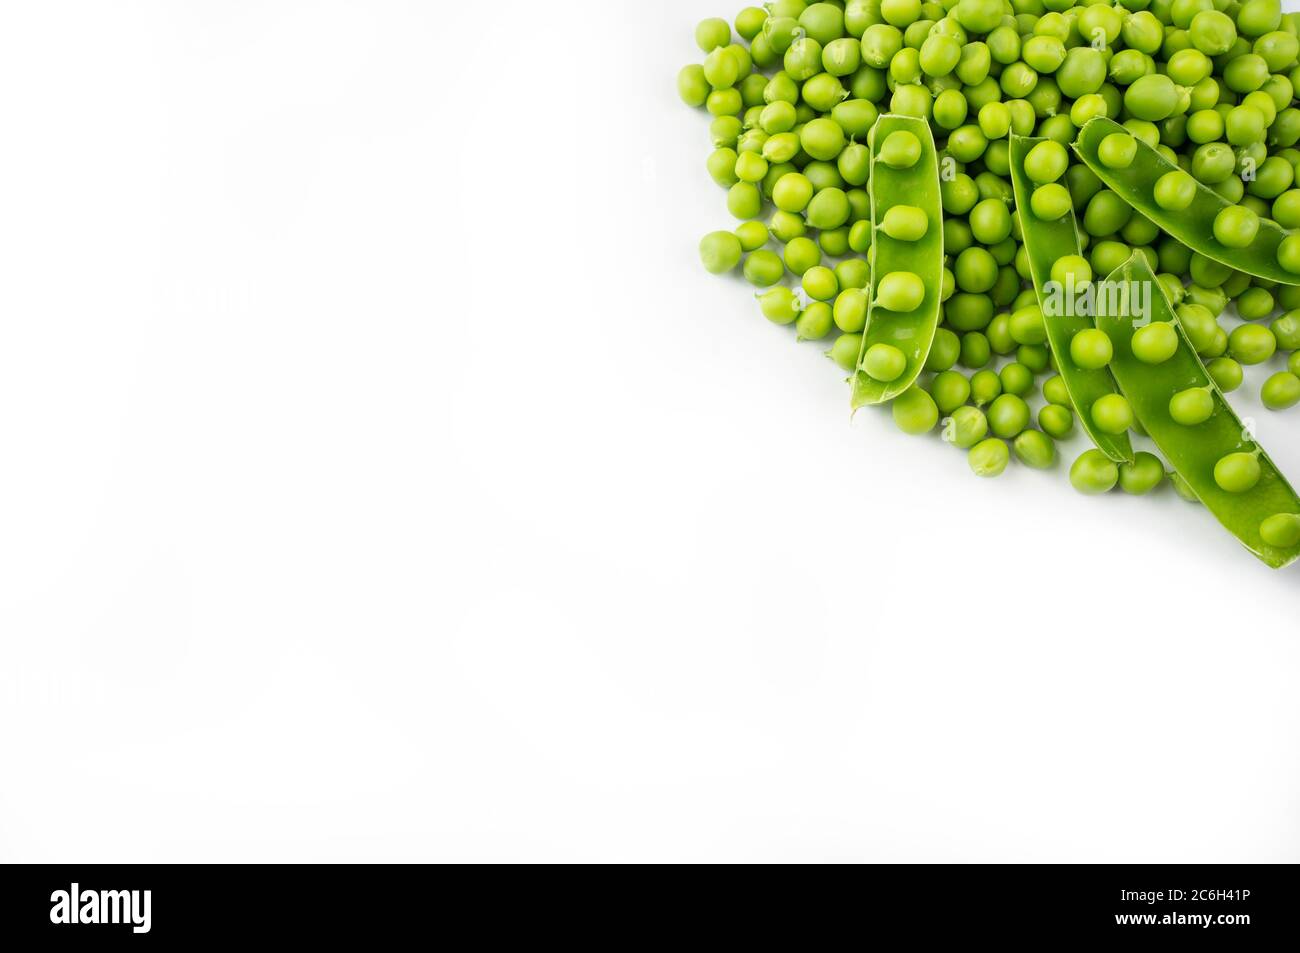 Green peas on a white background. Green peas at border of image with copy space for text. Fresh green peas on a white background. Stock Photo